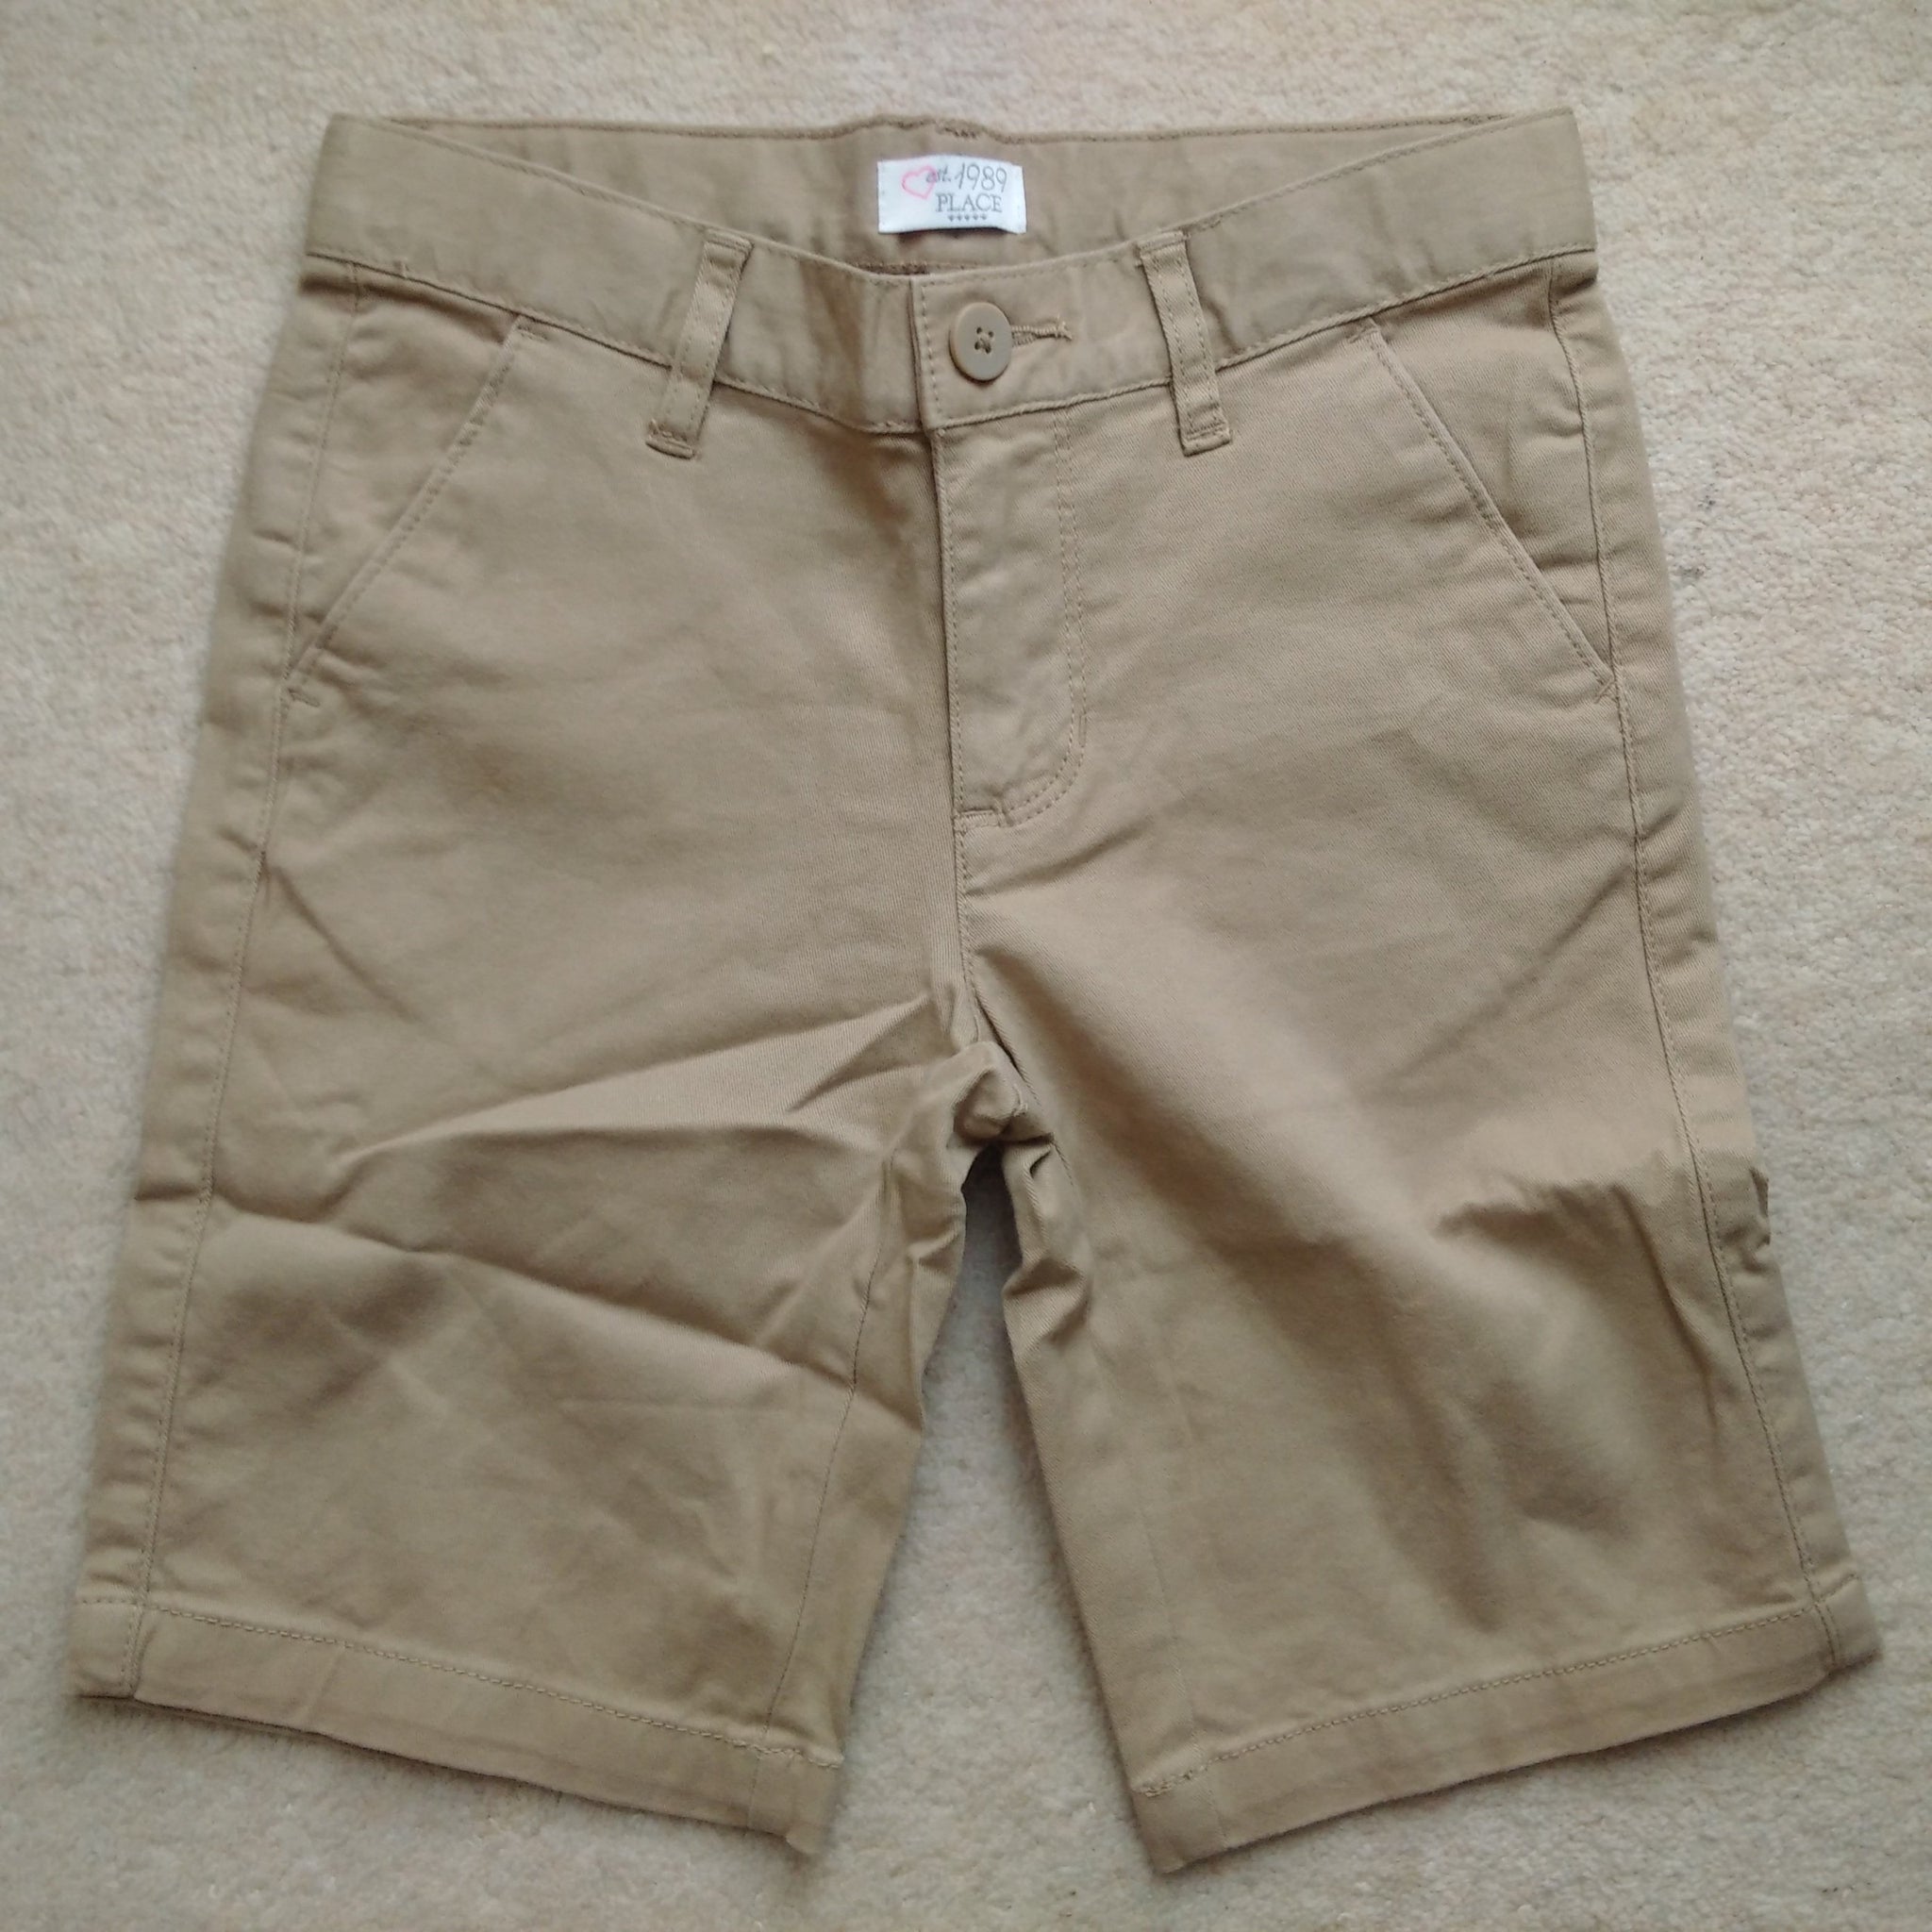 Est 1989 Place Boys Woven Chino Shorts Brown - Stockpoint Apparel Outlet